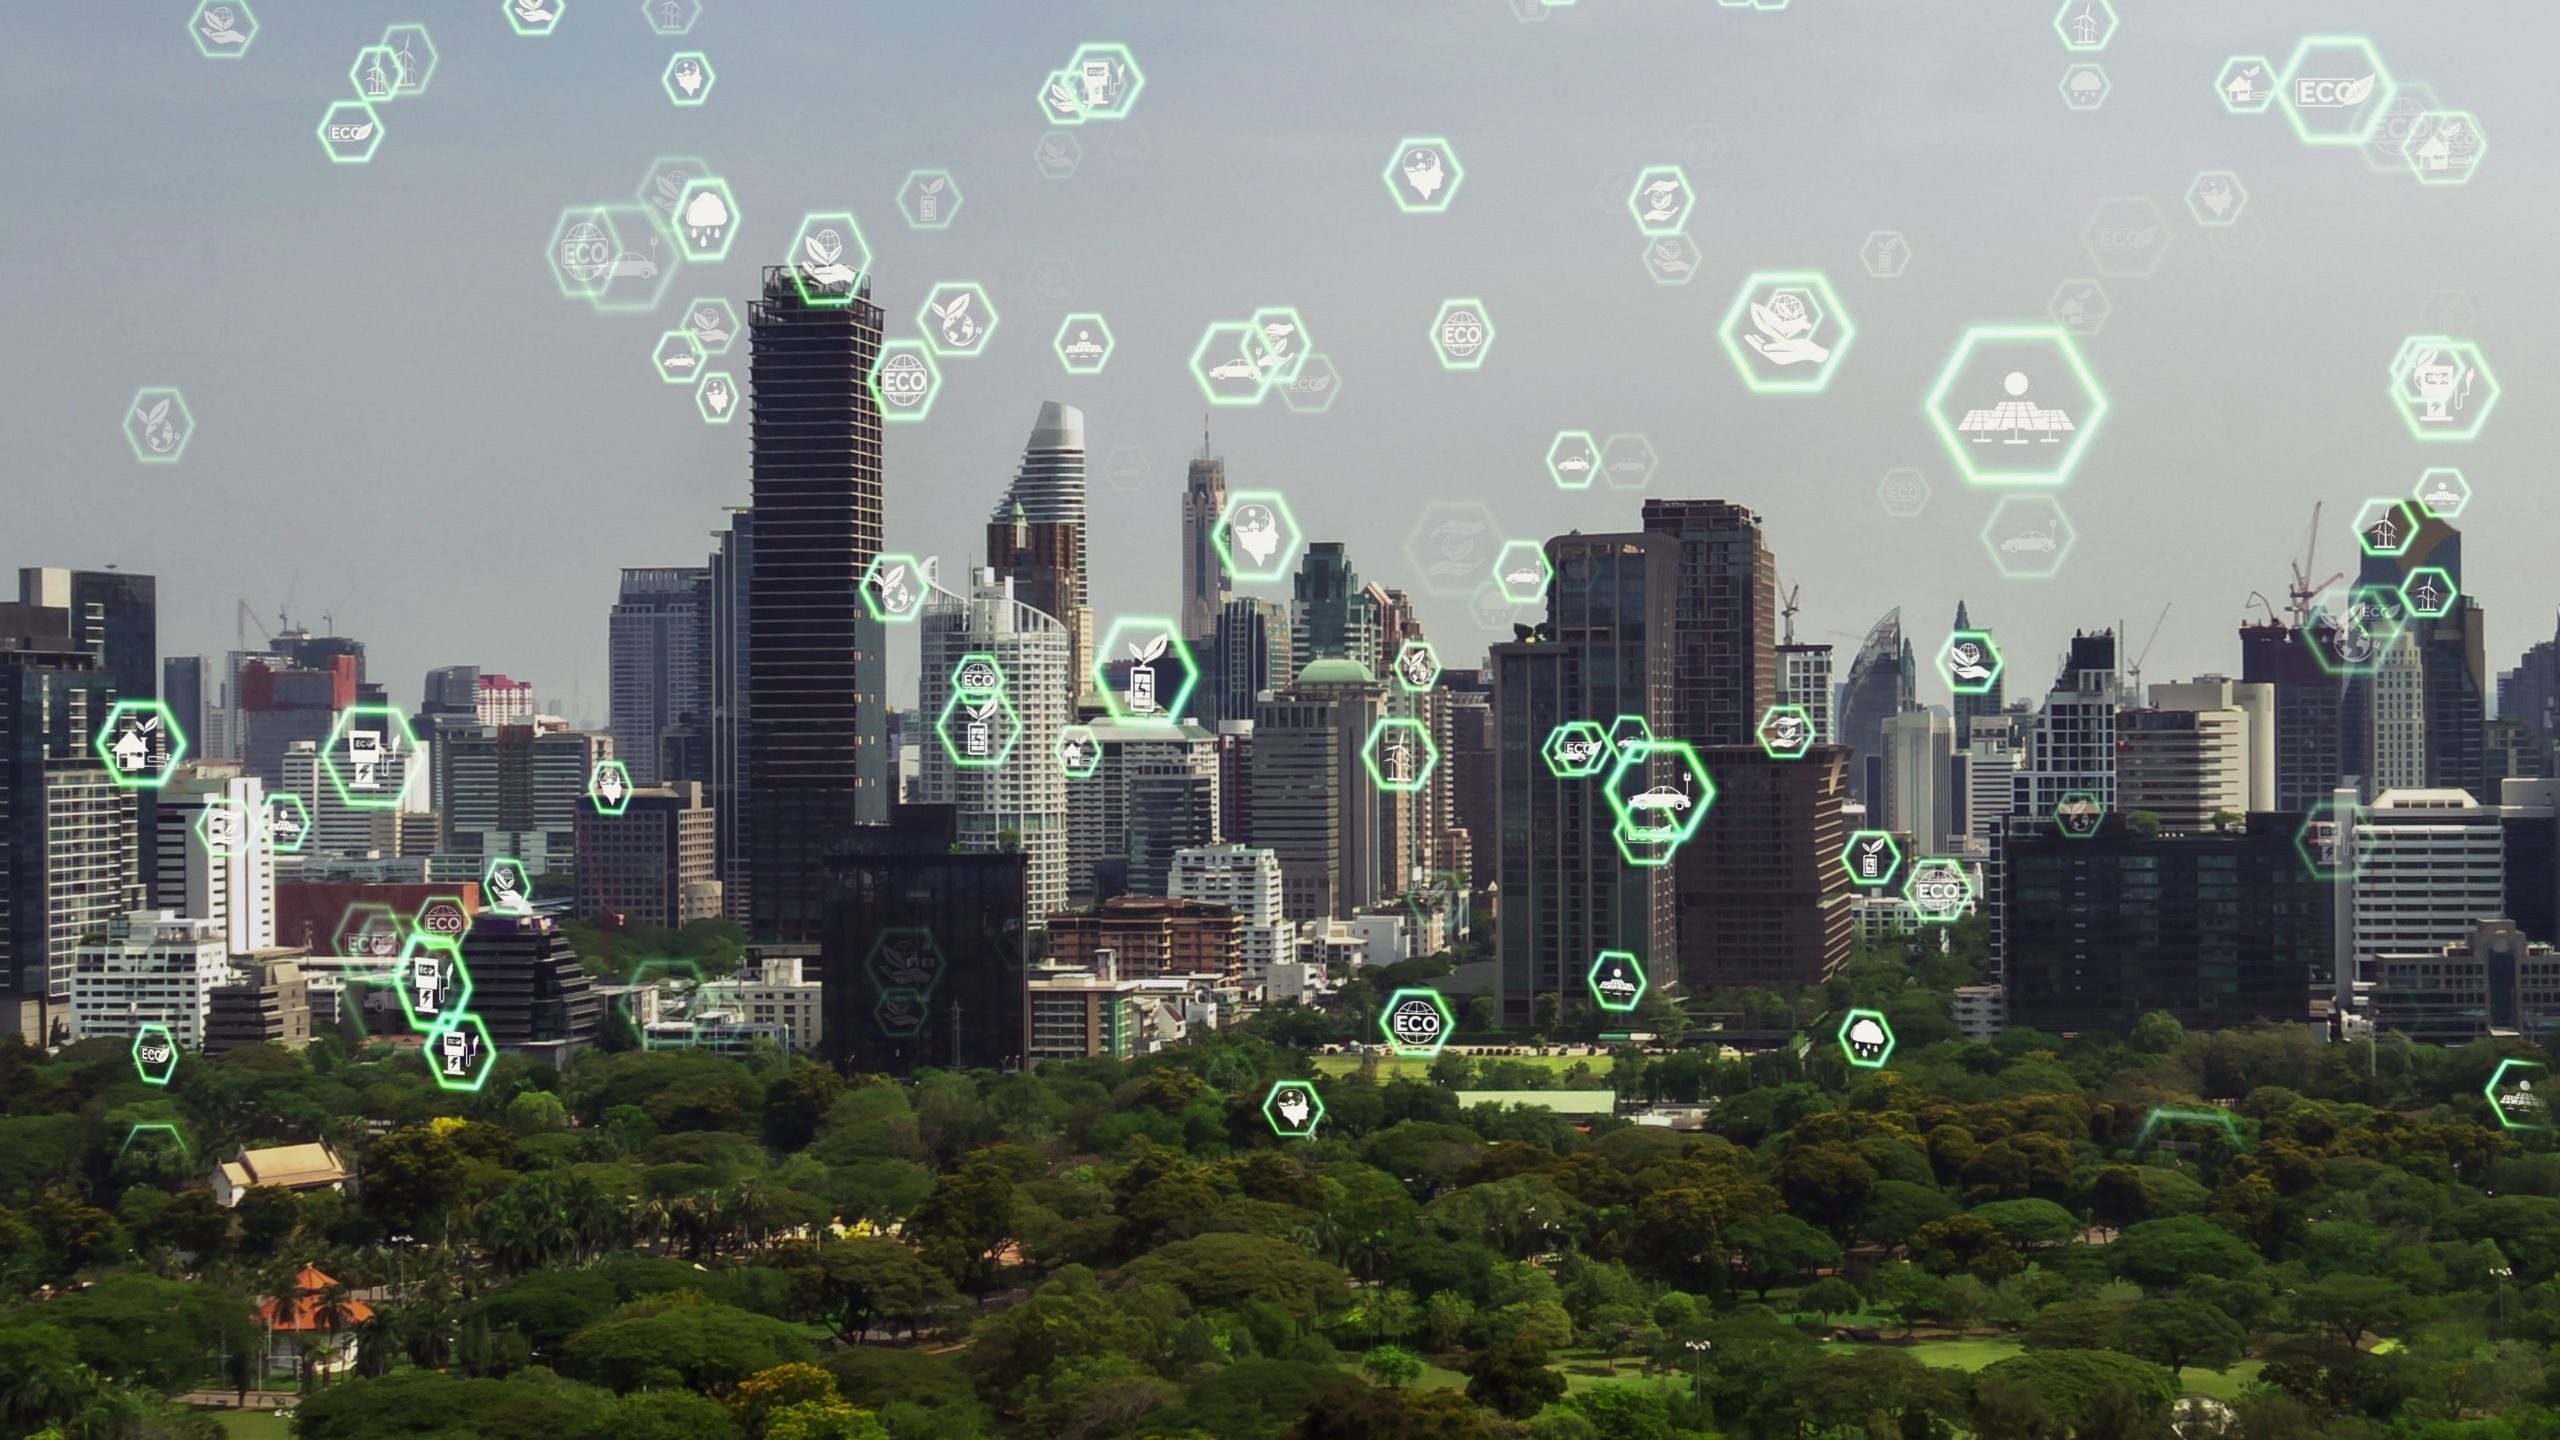 A large city with green space and an overlay of icons showing digital transformation initiatives.